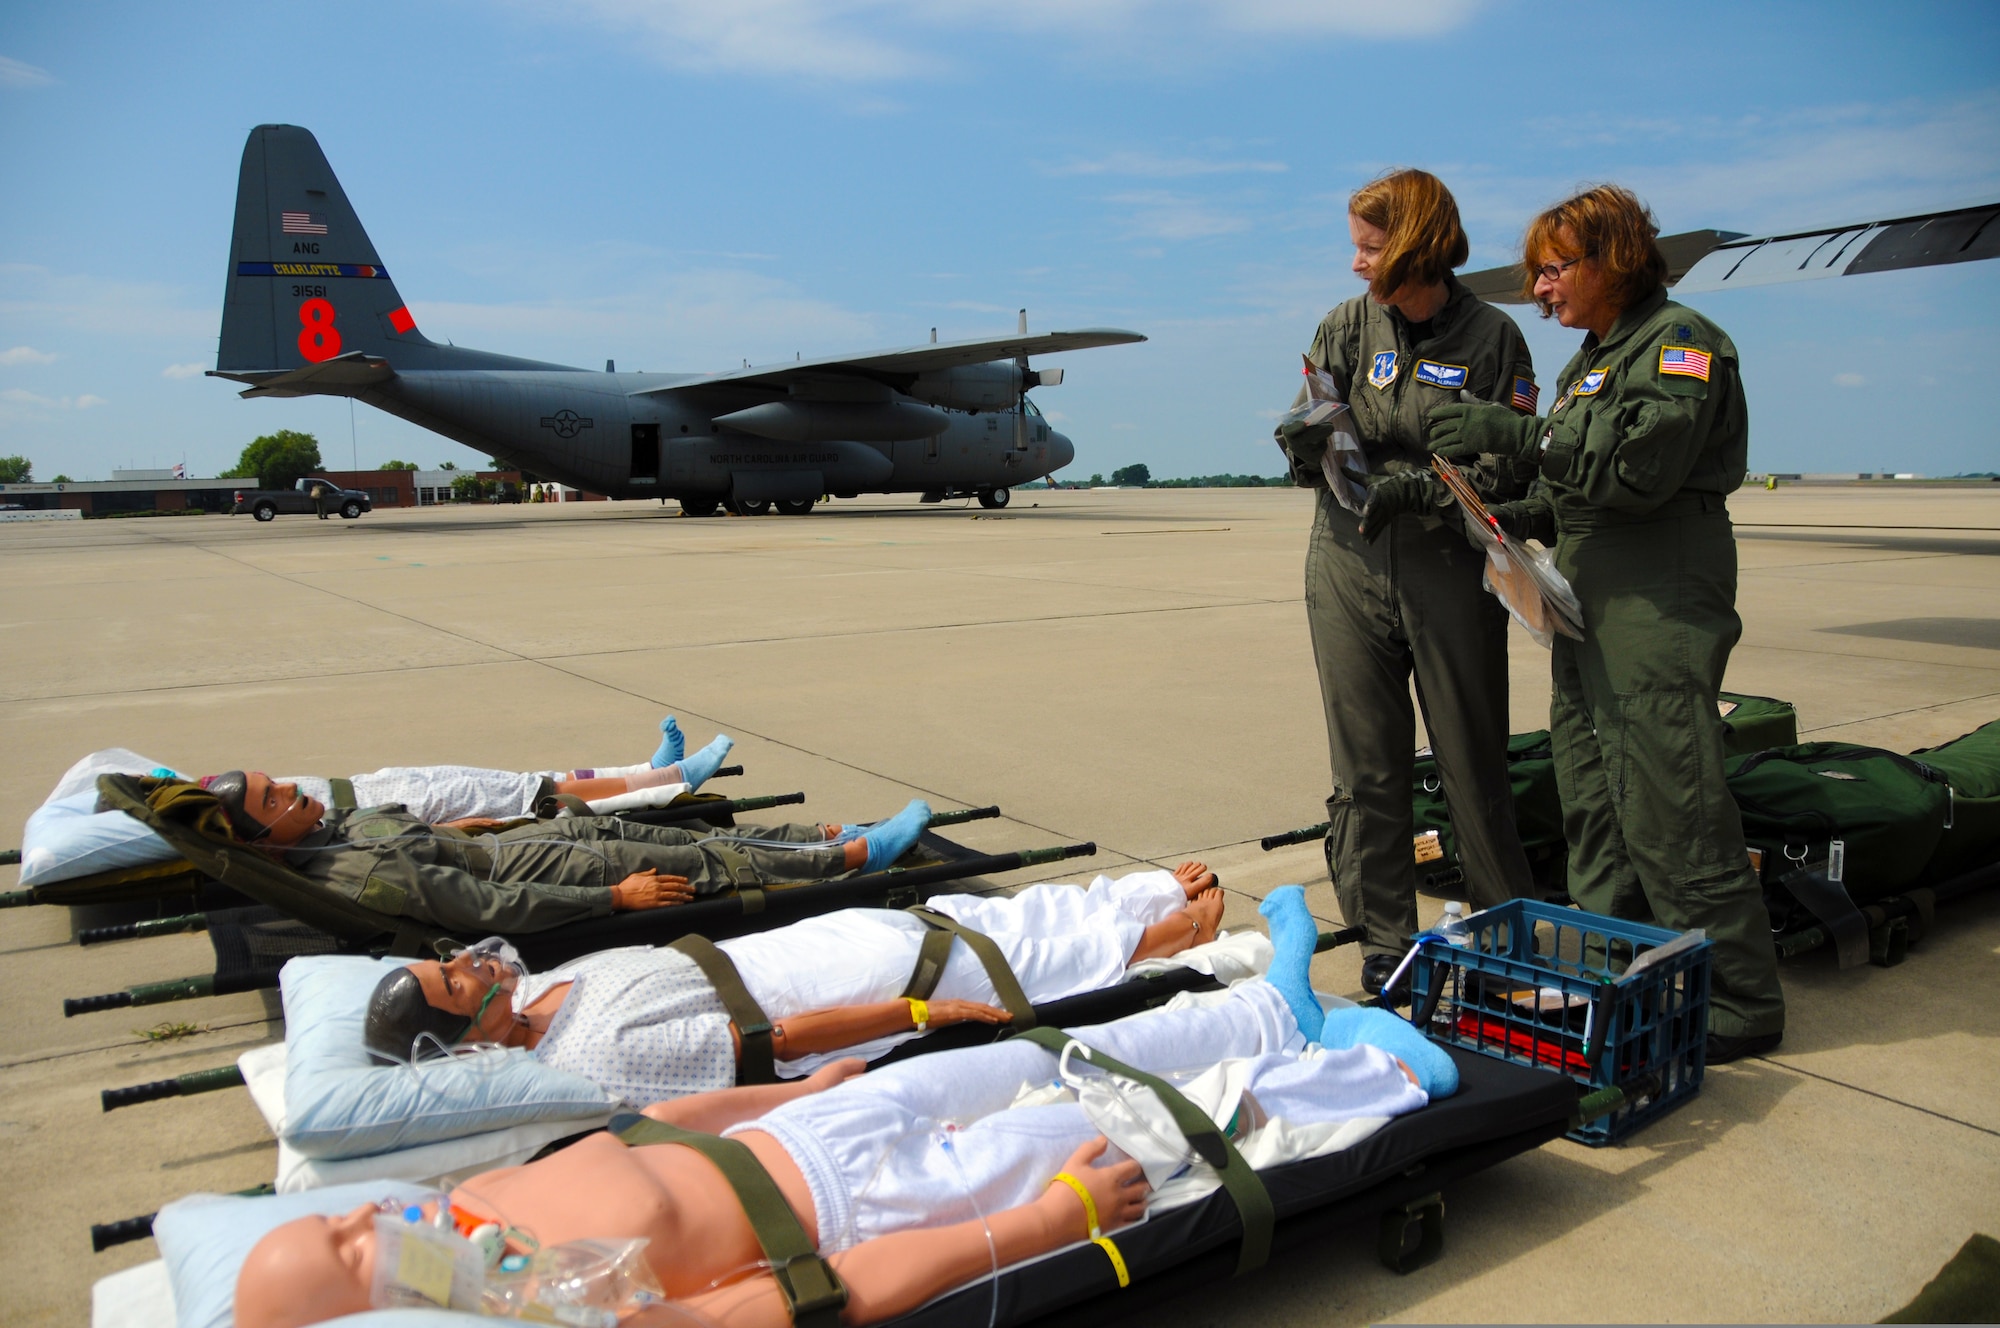 U.S. Air Force Maj. Martha Alspaugh, left, and Lt. Col. Jane Elkovich, both flight nurses assigned to 156th Aeromedical Evacuation Squadron, North Carolina Air National Guard, prepare dummies before loading them into a C-130 Hercules aircraft in Charlotte, N.C., July 29, 2010, for a check ride. The Airmen are hosting Moldovan military medical officers while sharing the North Carolina National Guard?s medical evacuation techniques. The exchange is part of the NATO State Partnership Program, which links U.S. states with partner countries for the purpose of supporting U.S. security cooperation objectives. (DoD photo by Tech. Sgt. Brian E. Christiansen, U.S. Air Force/Released)